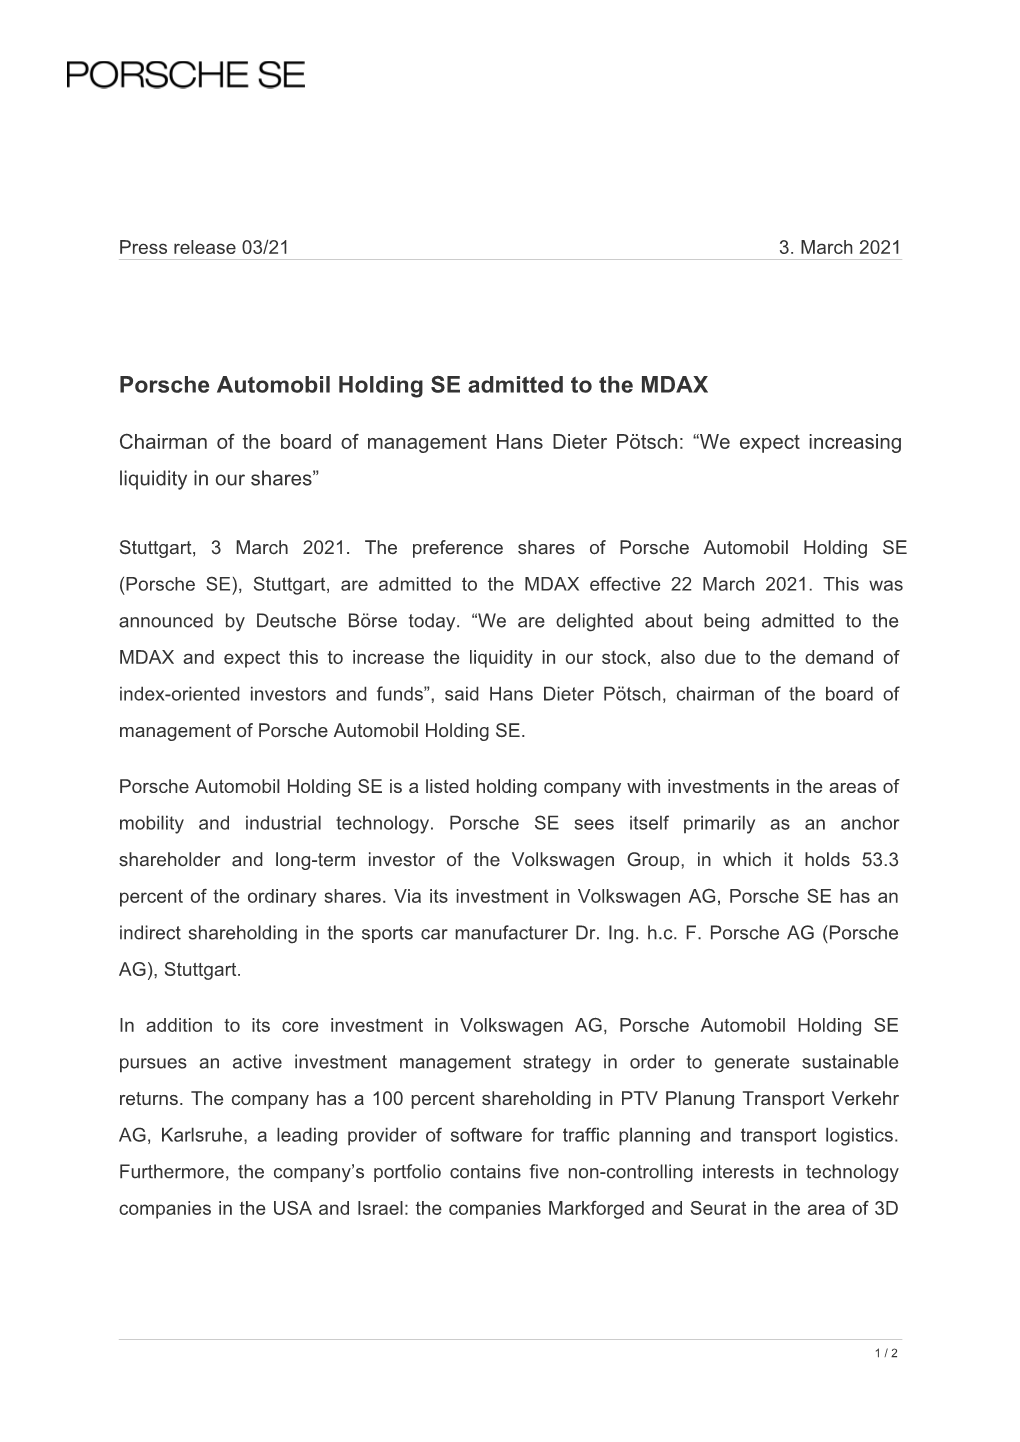 Porsche Automobil Holding SE Admitted to the MDAX